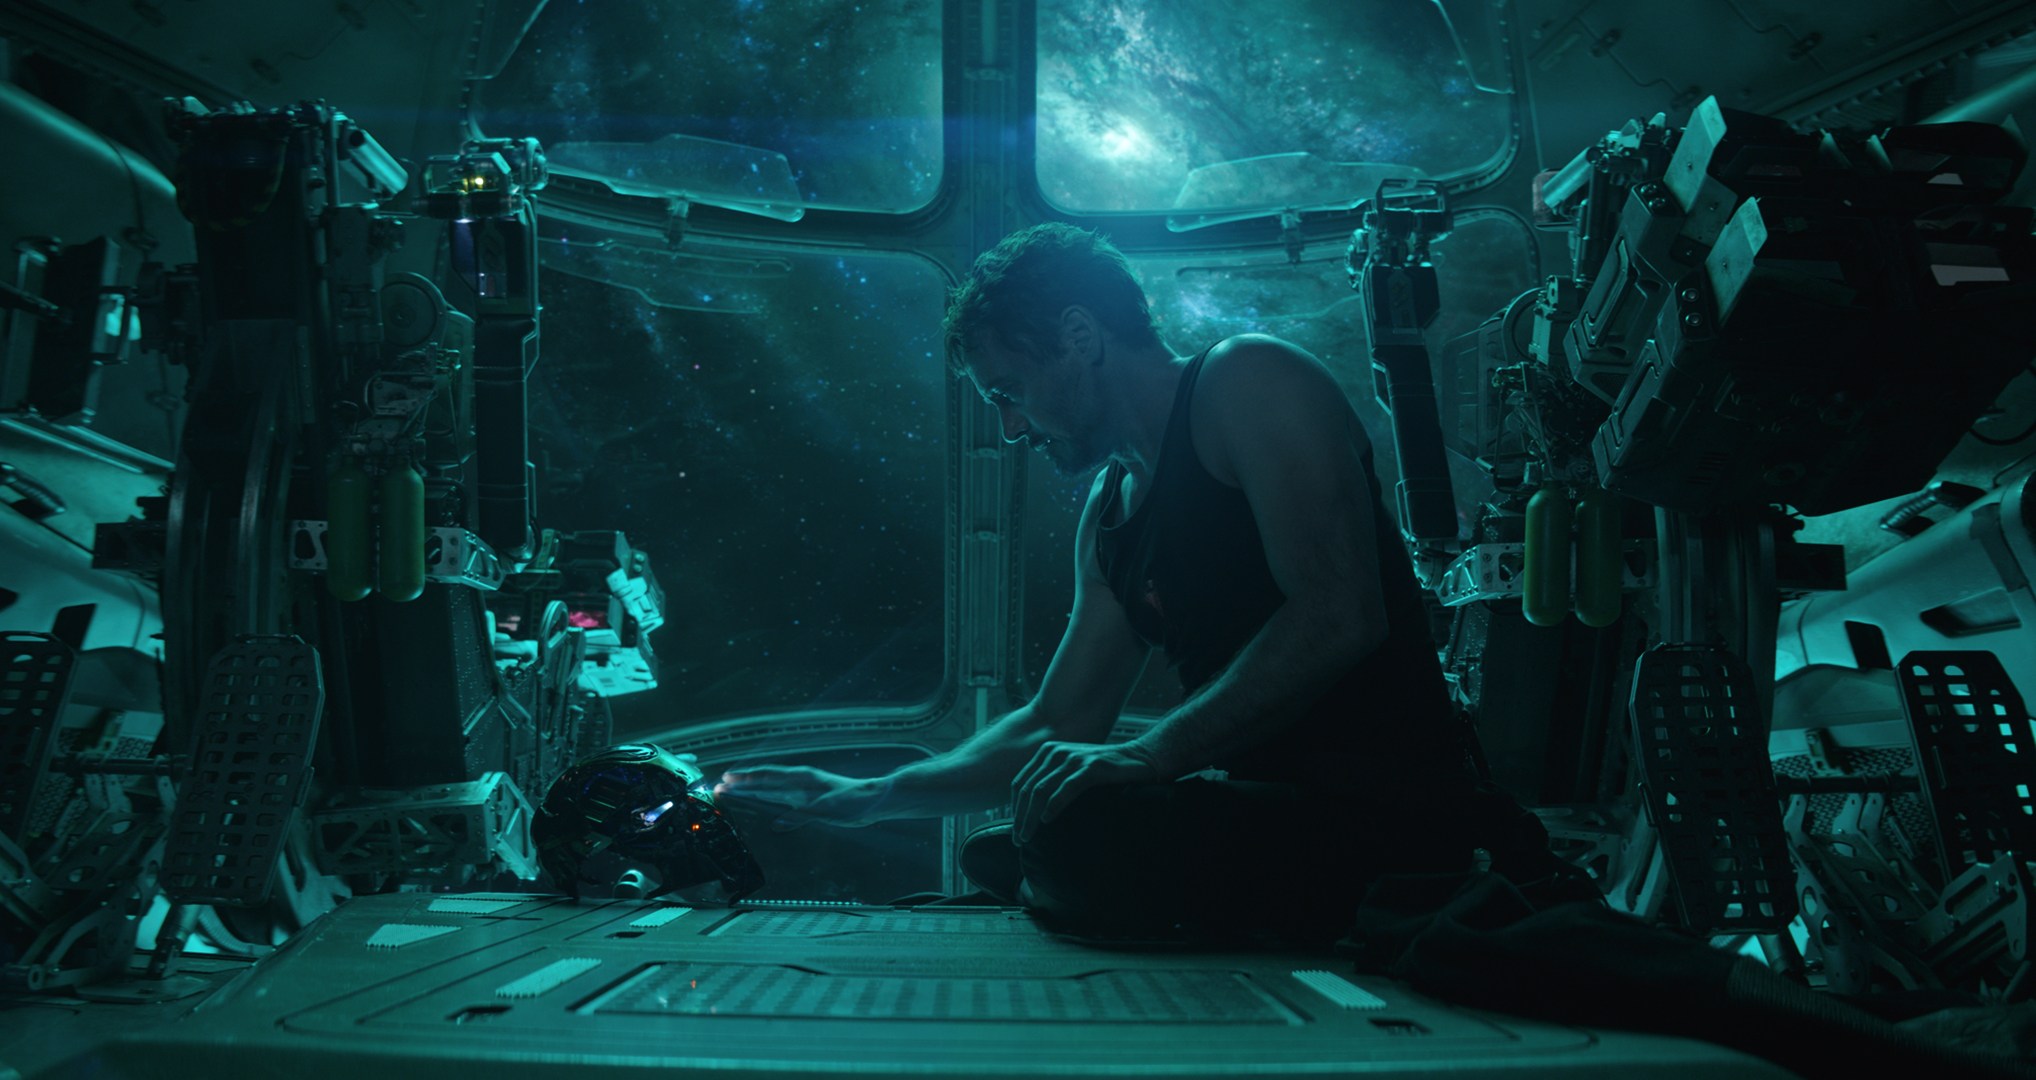 Lost In Space Avengers Endgame HD Wallpaper Background Image